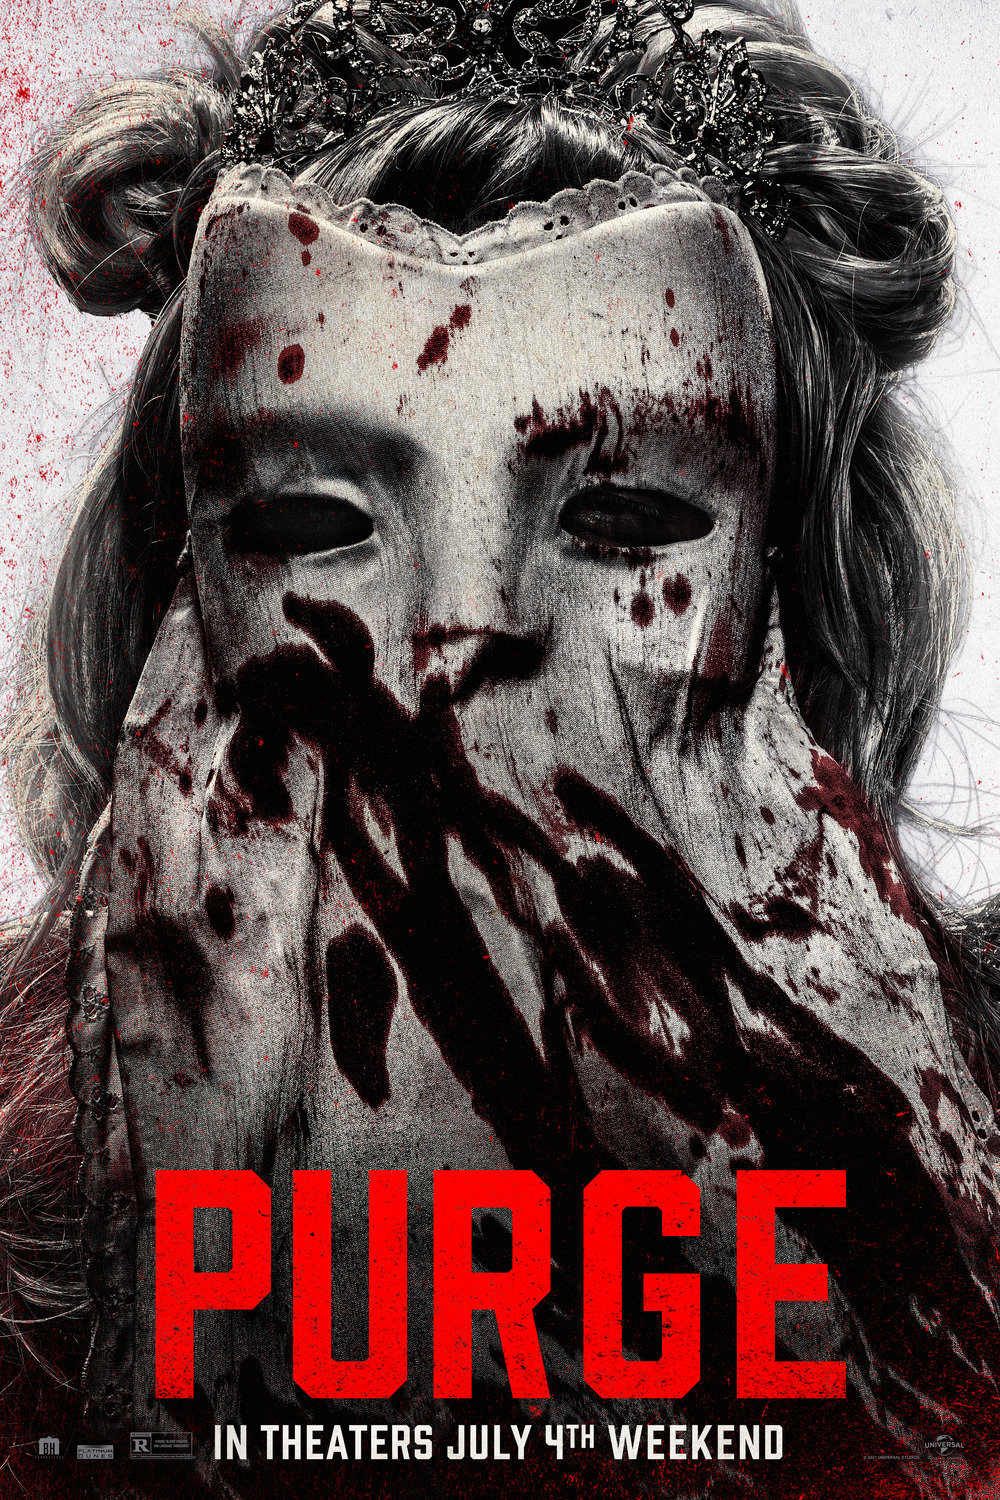 Extra Large Movie Poster Image for The Forever Purge (#14 of 15)